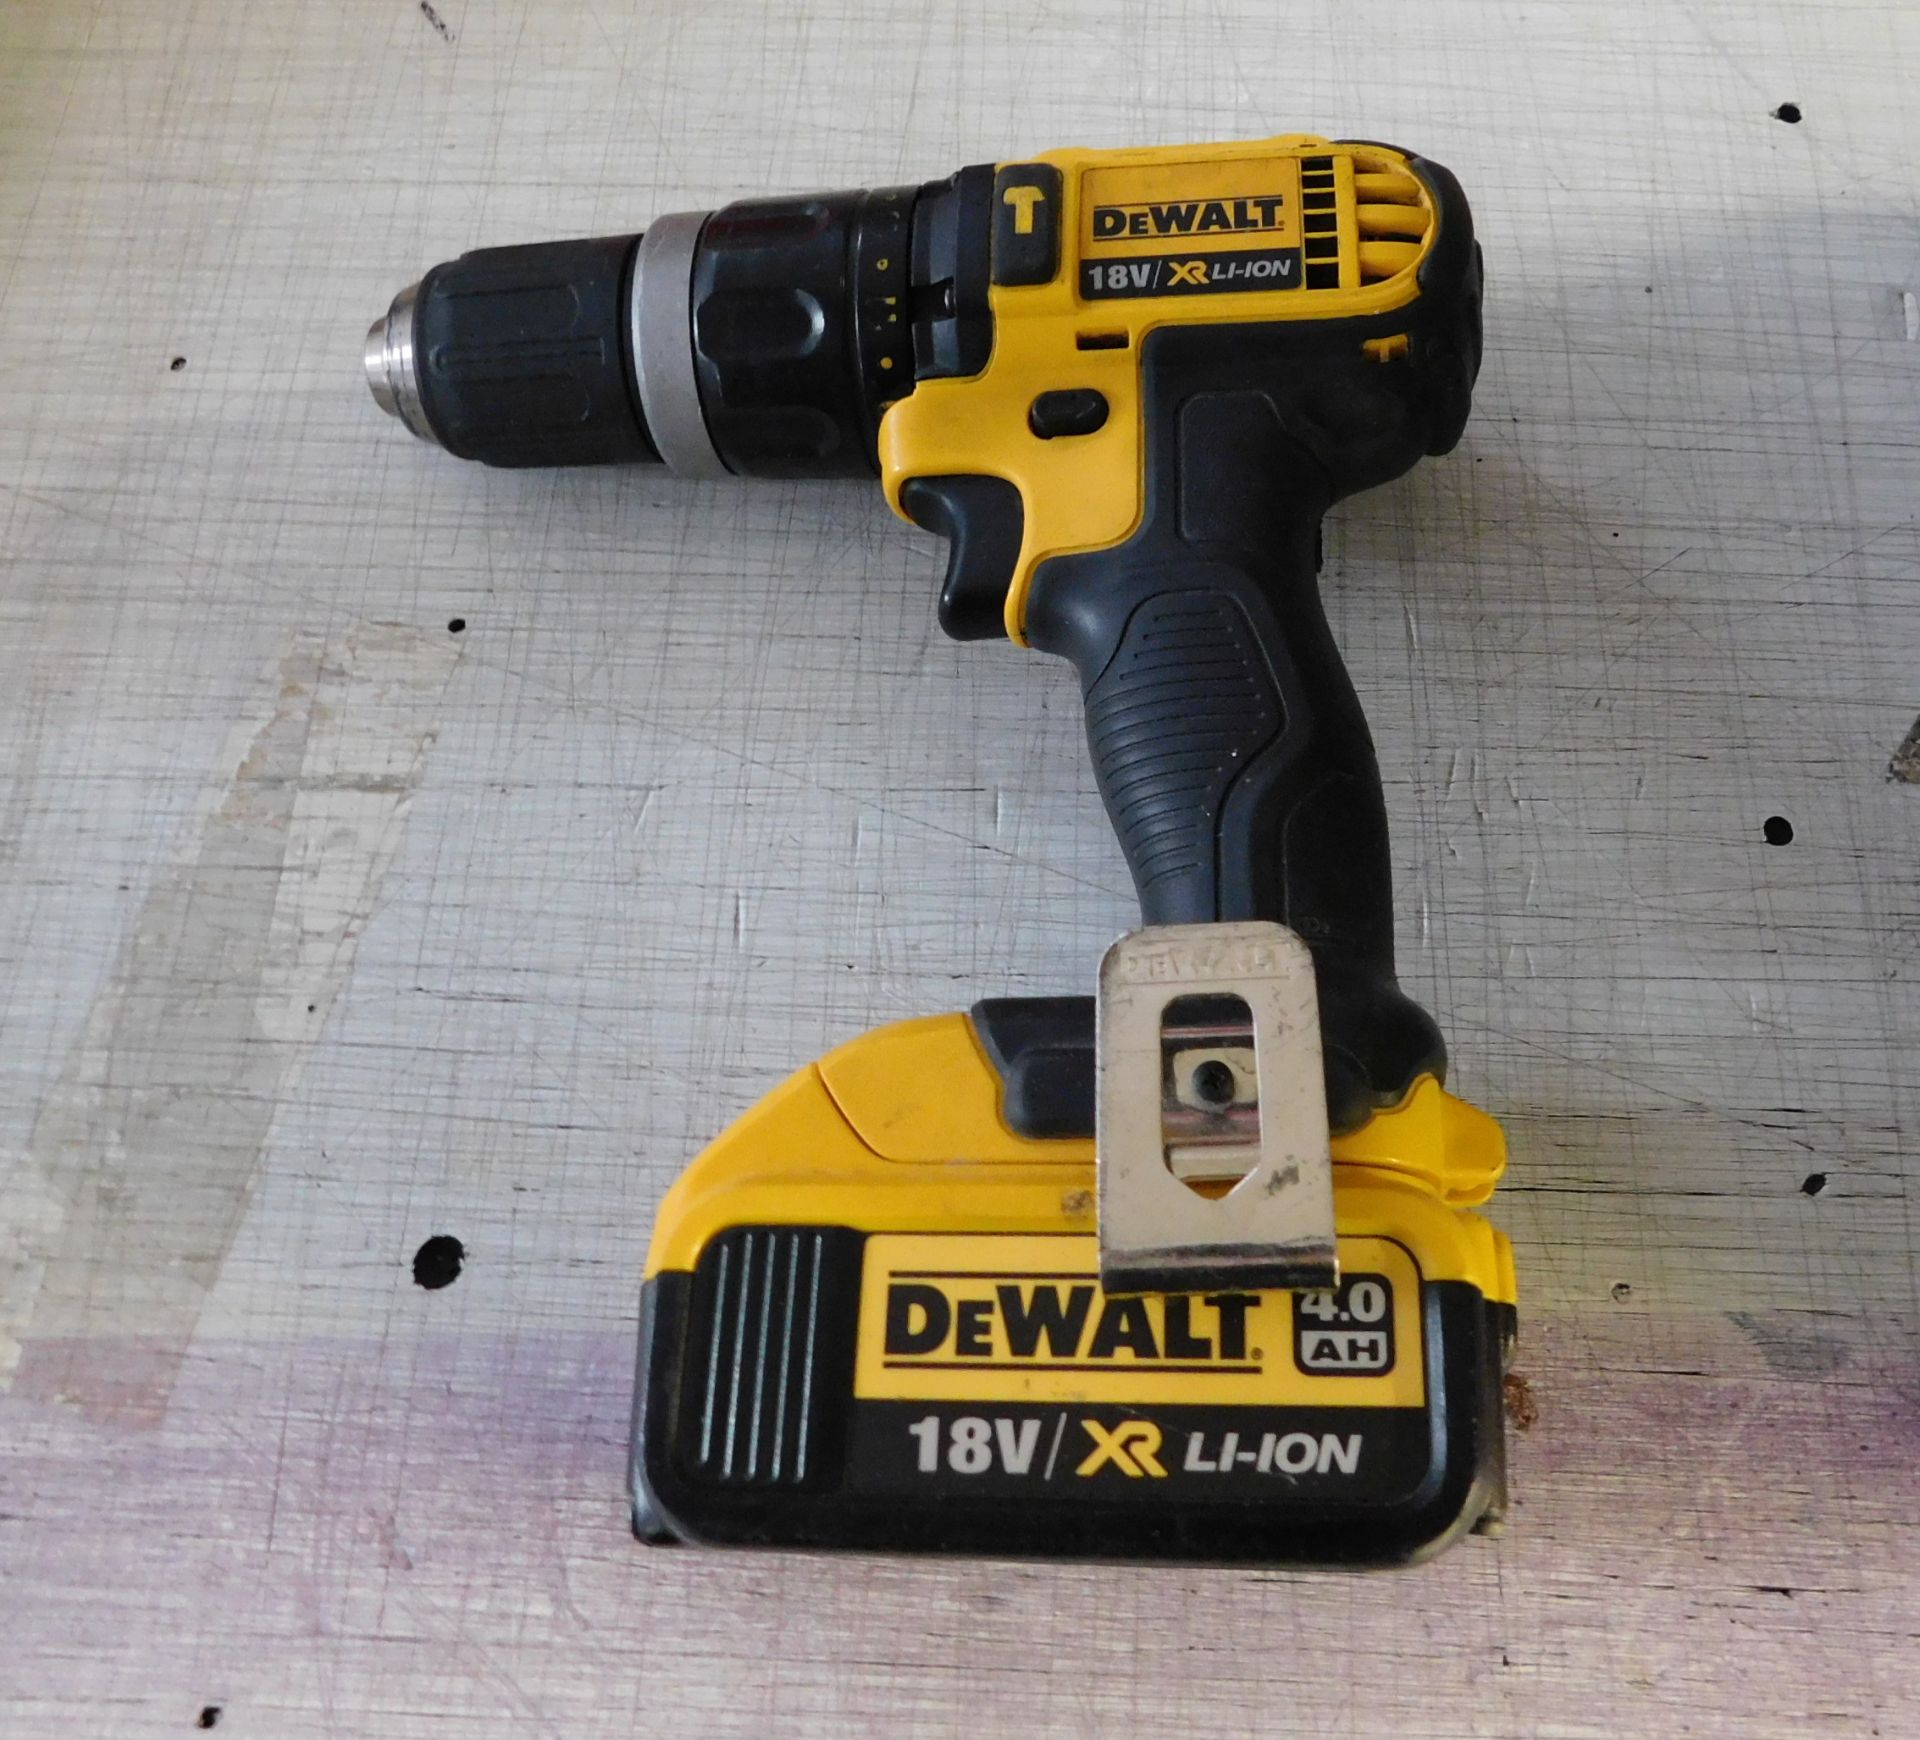 DeWalt 18v Cordless Drill, 2 Batteries, Charger & Carry Case (on mezzanine) (Location Rochdale. - Image 2 of 8